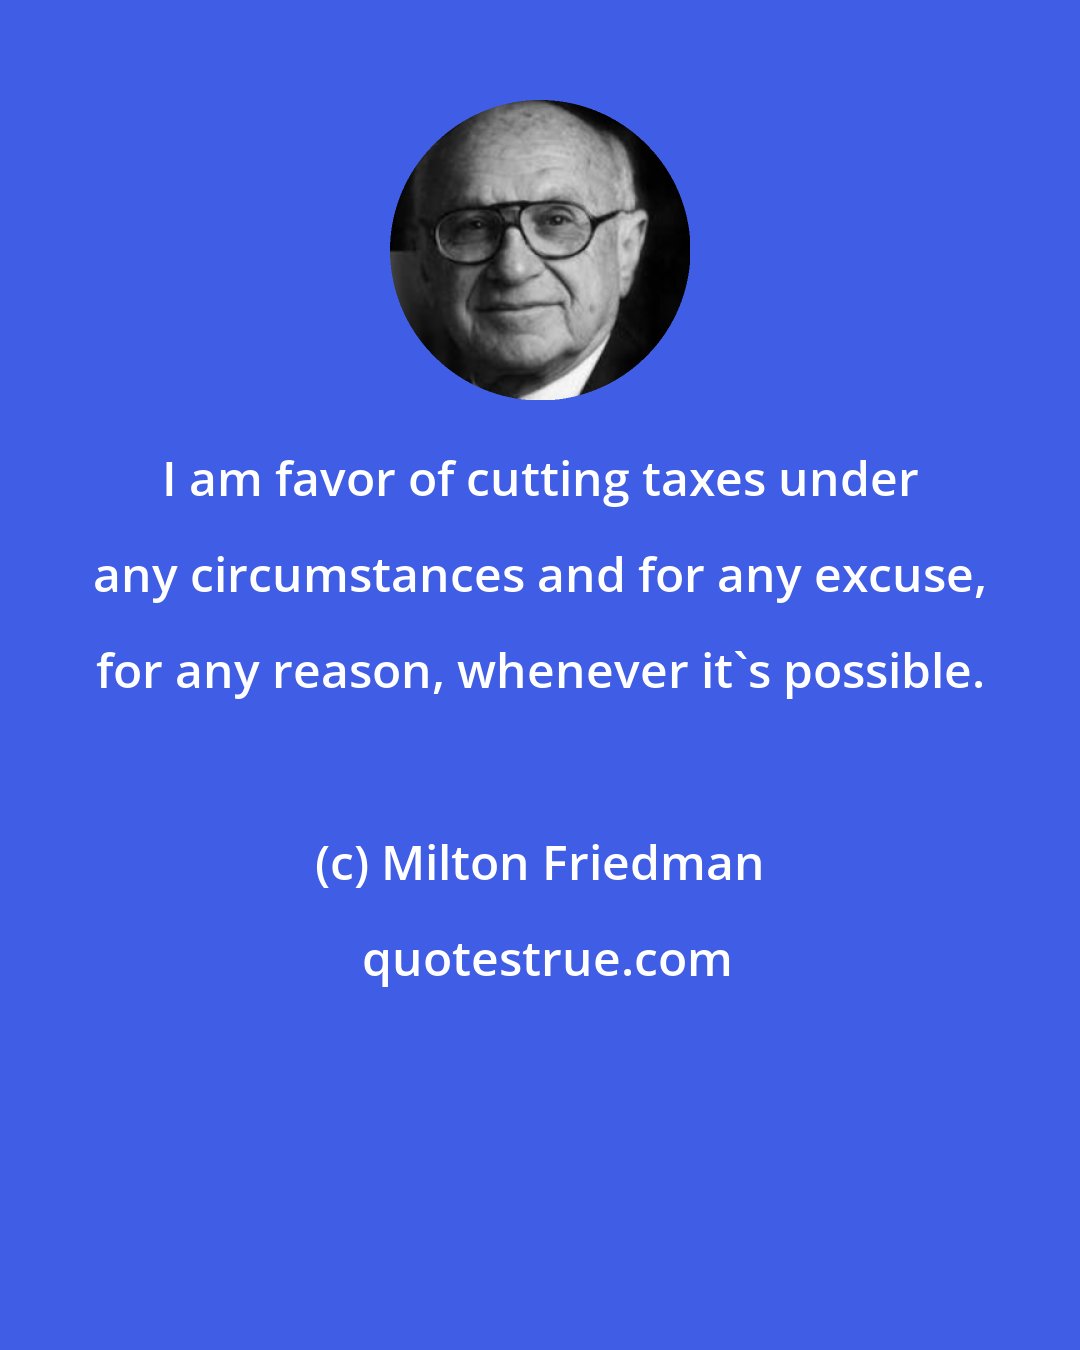 Milton Friedman: I am favor of cutting taxes under any circumstances and for any excuse, for any reason, whenever it's possible.